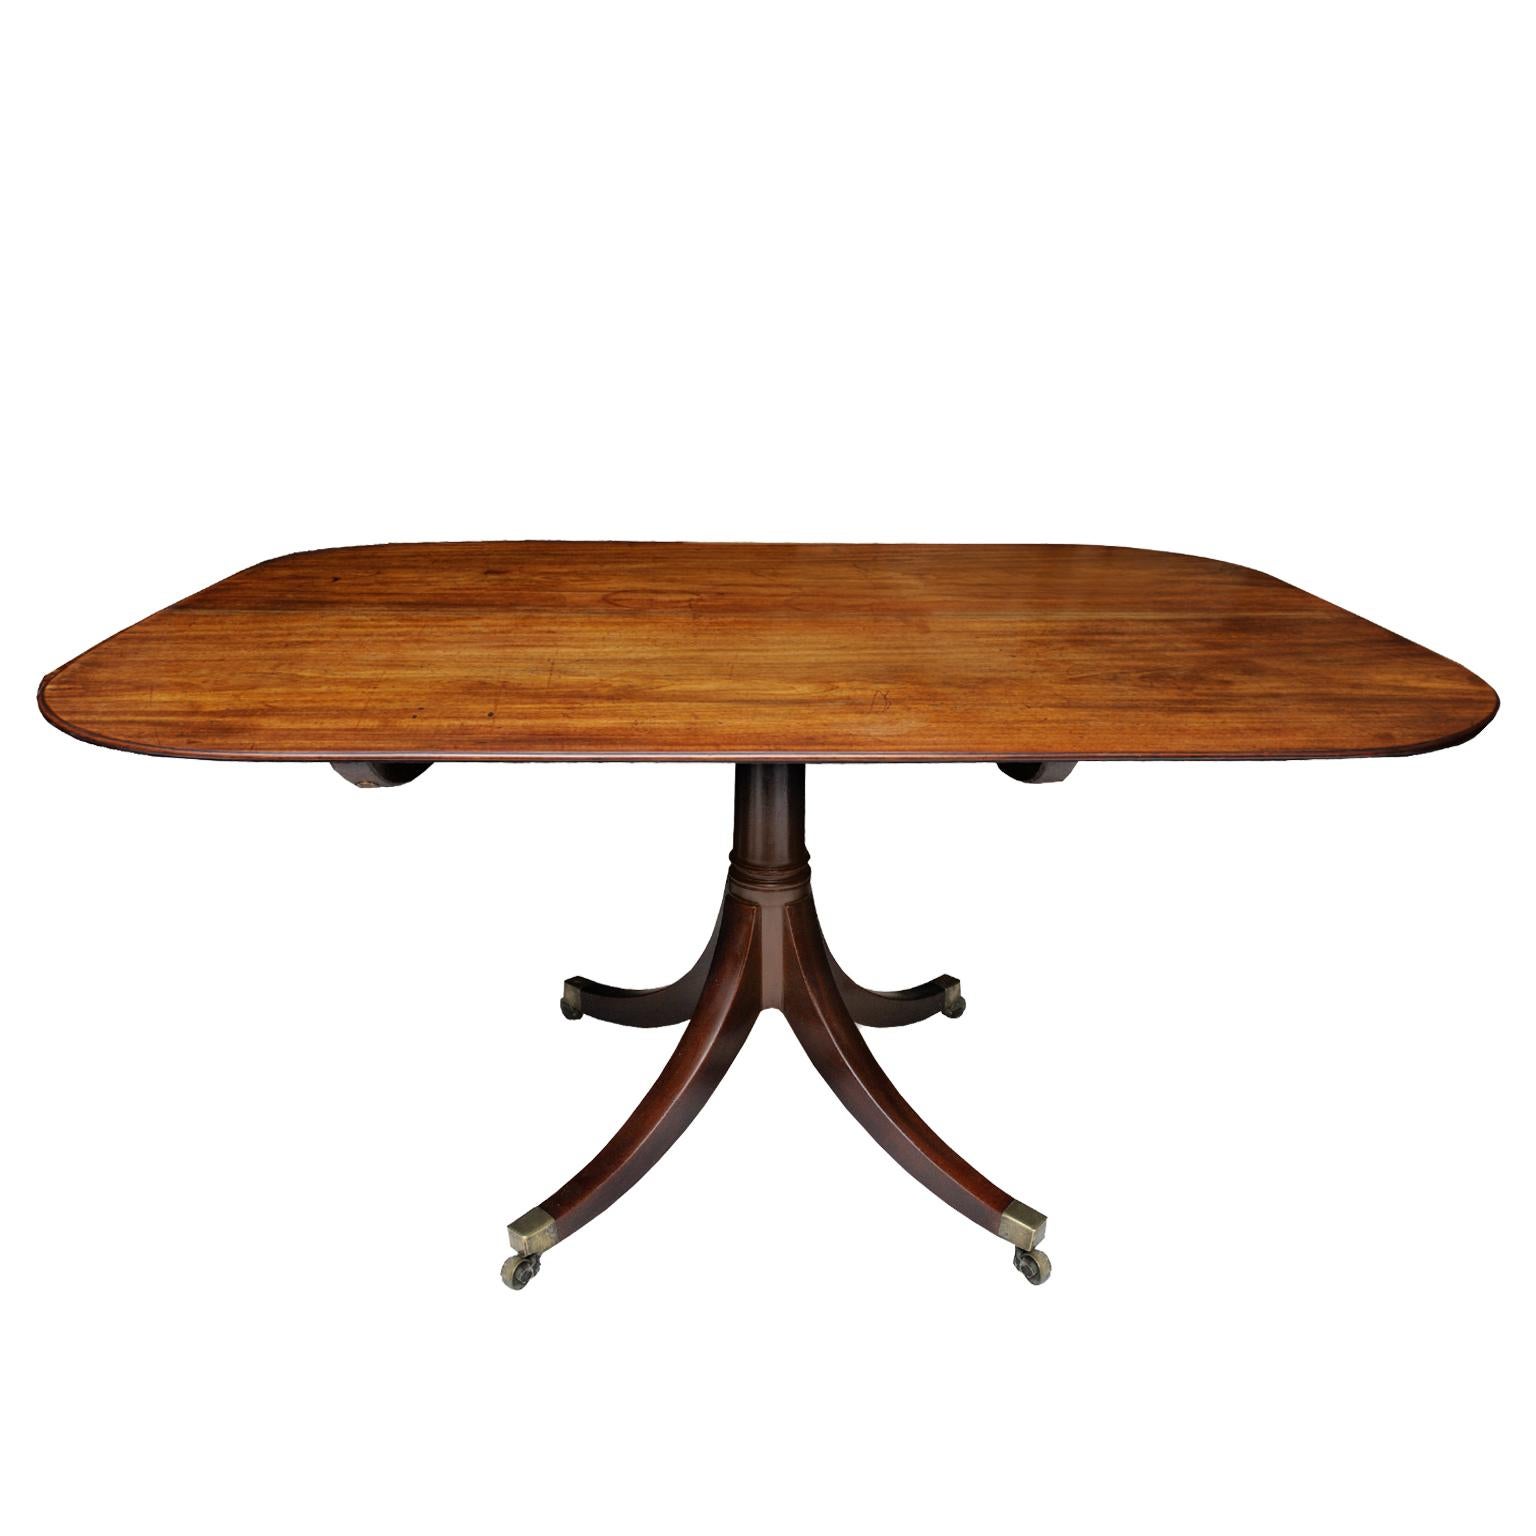 This is a large and flexible early 19th century English Regency mahogany tilt-top breakfast table, standing on sabre legs with brass cap castors, circa 1810.

Measures: Height 70cm (27.5